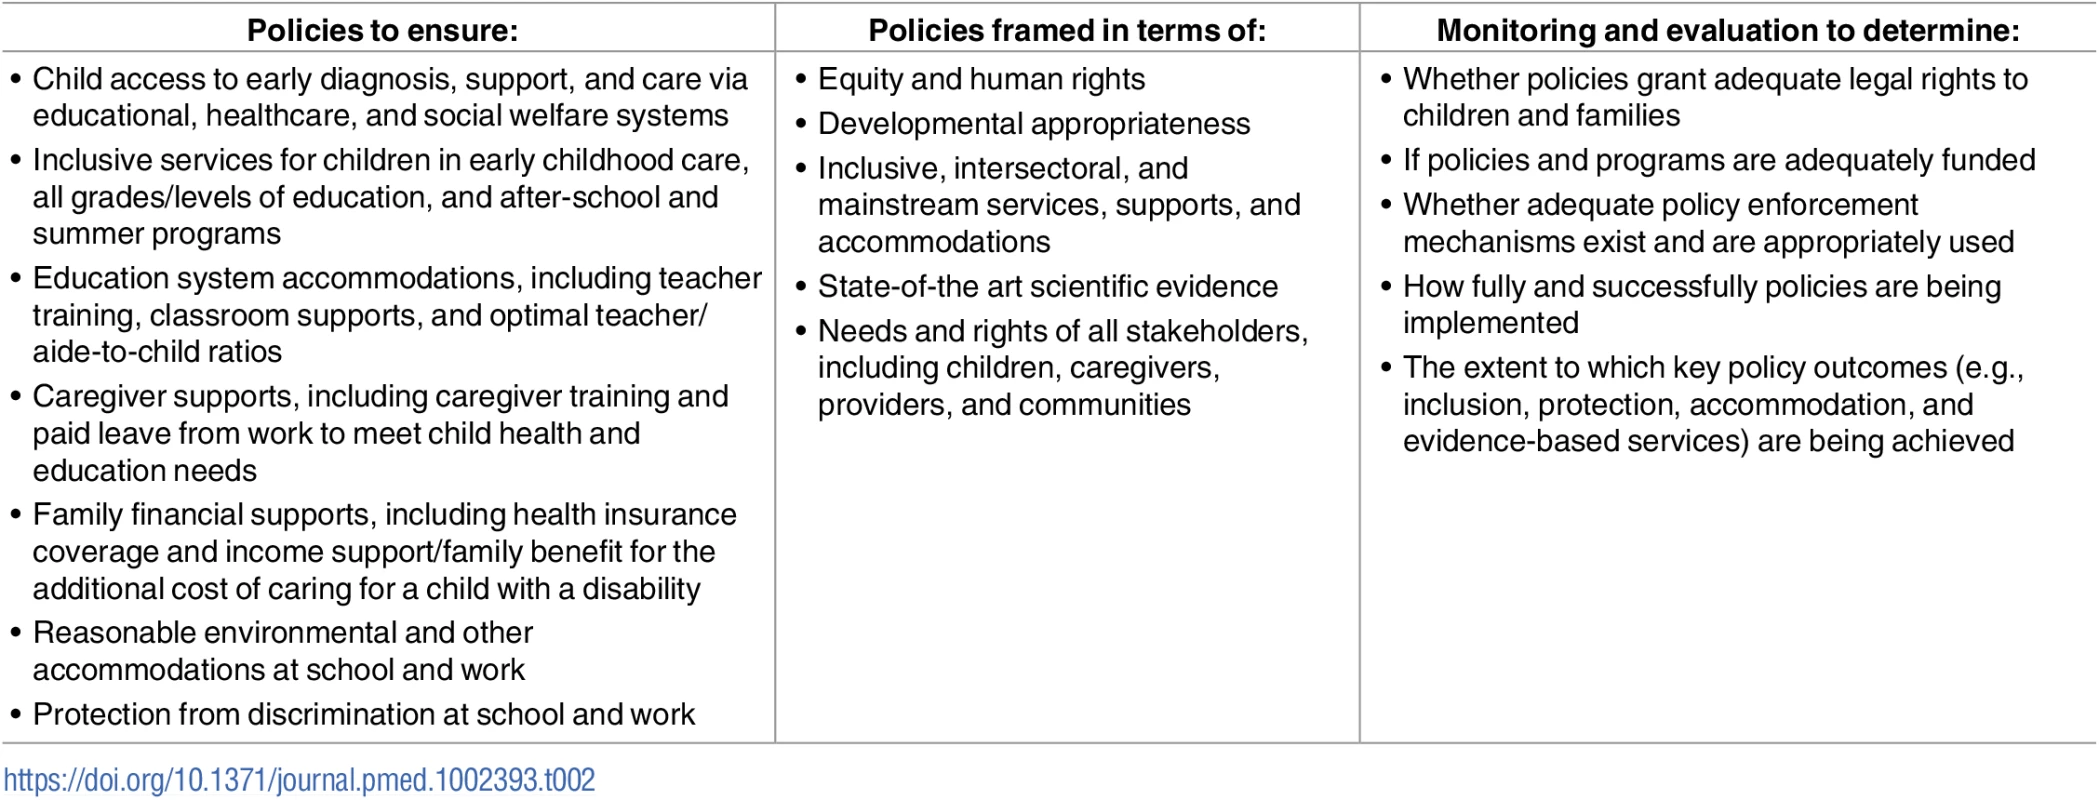 Policies to support children with developmental delays and disabilities and their caregivers.